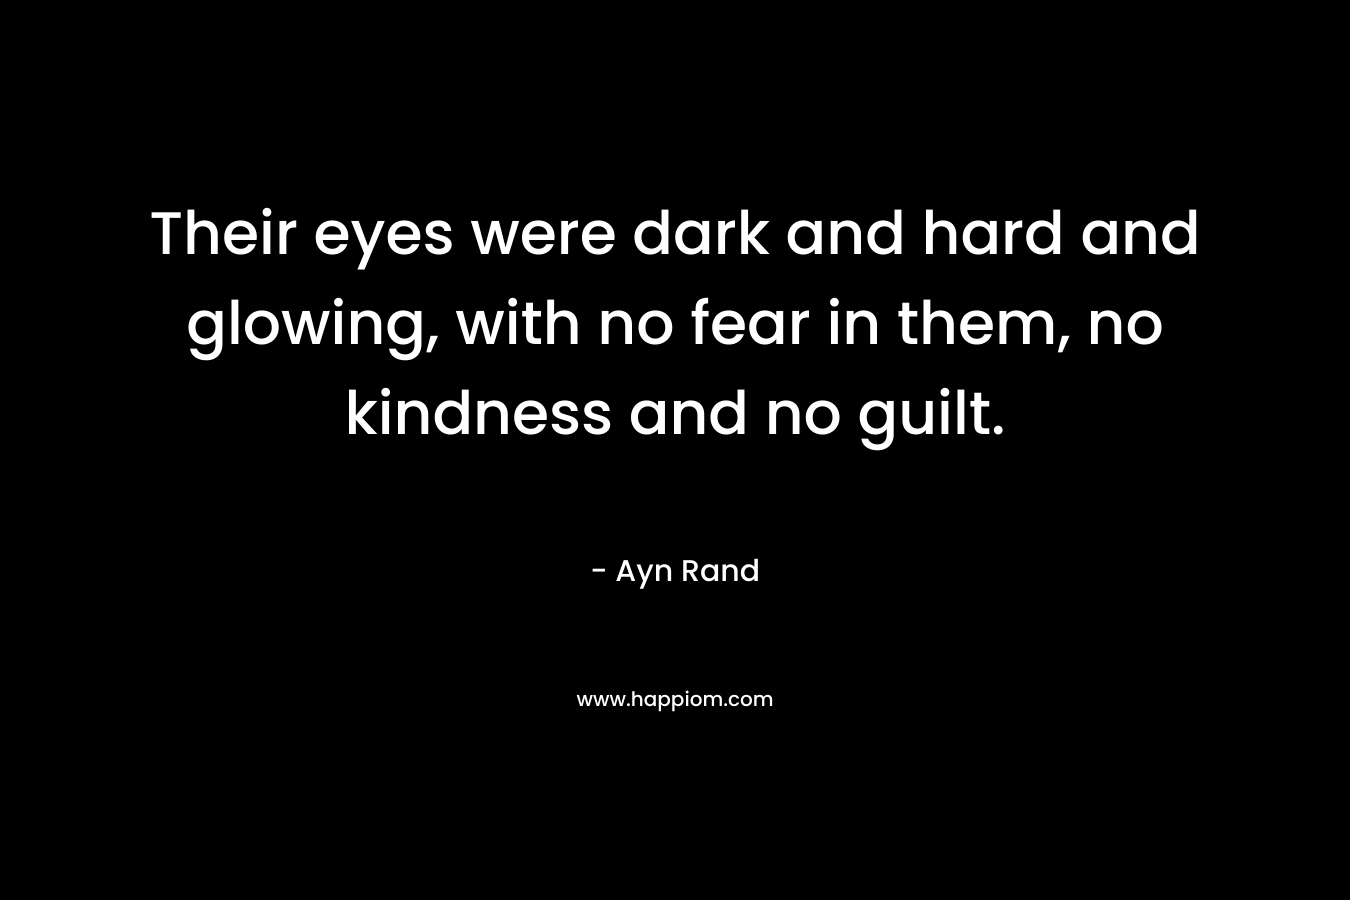 Their eyes were dark and hard and glowing, with no fear in them, no kindness and no guilt.